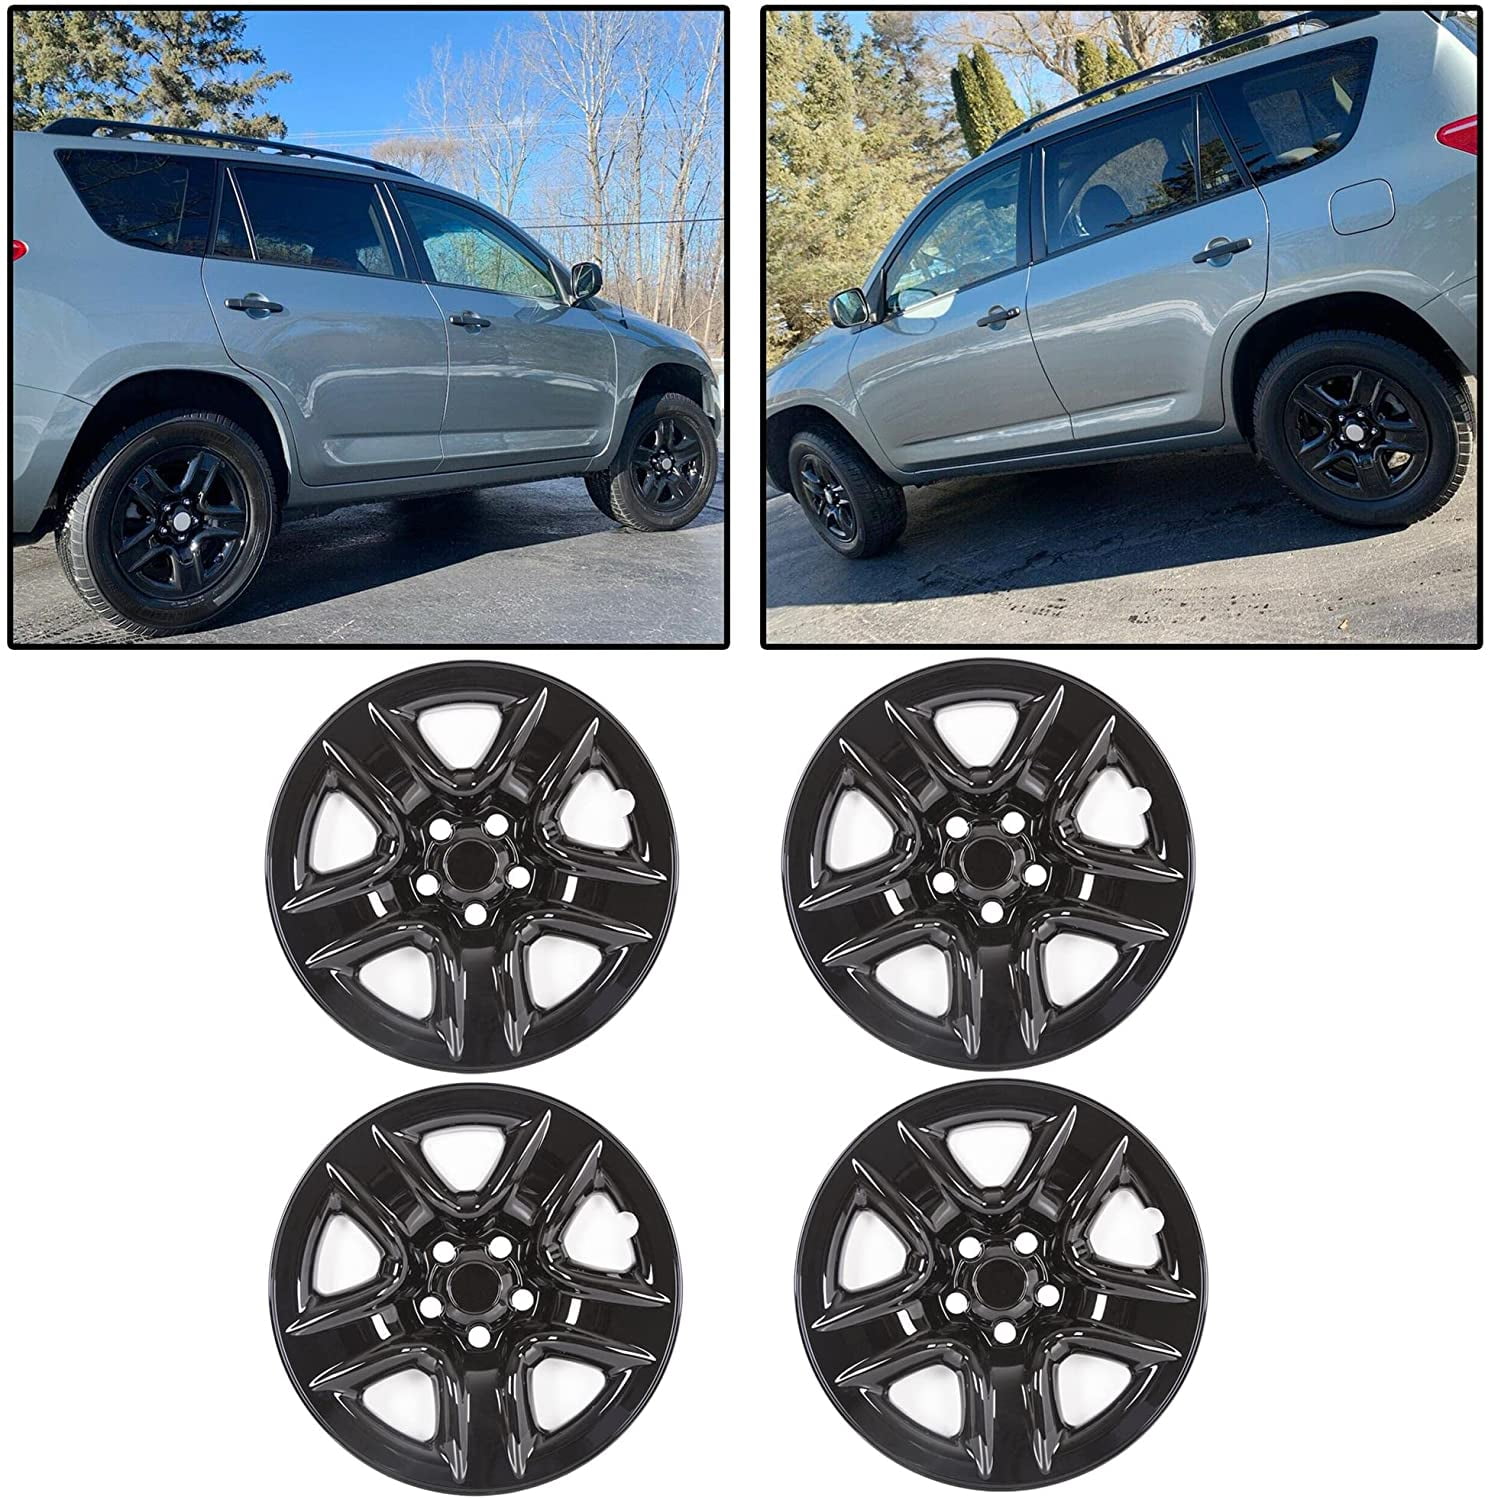 OxGord 17 inch Hubcap Wheel Skins for 2006-2012 Toyota Rav- Set of 4 Wheel Covers Auto Tire Replacement Exterior Cap Cover Car Accessories for 17inch Chrome Wheels 